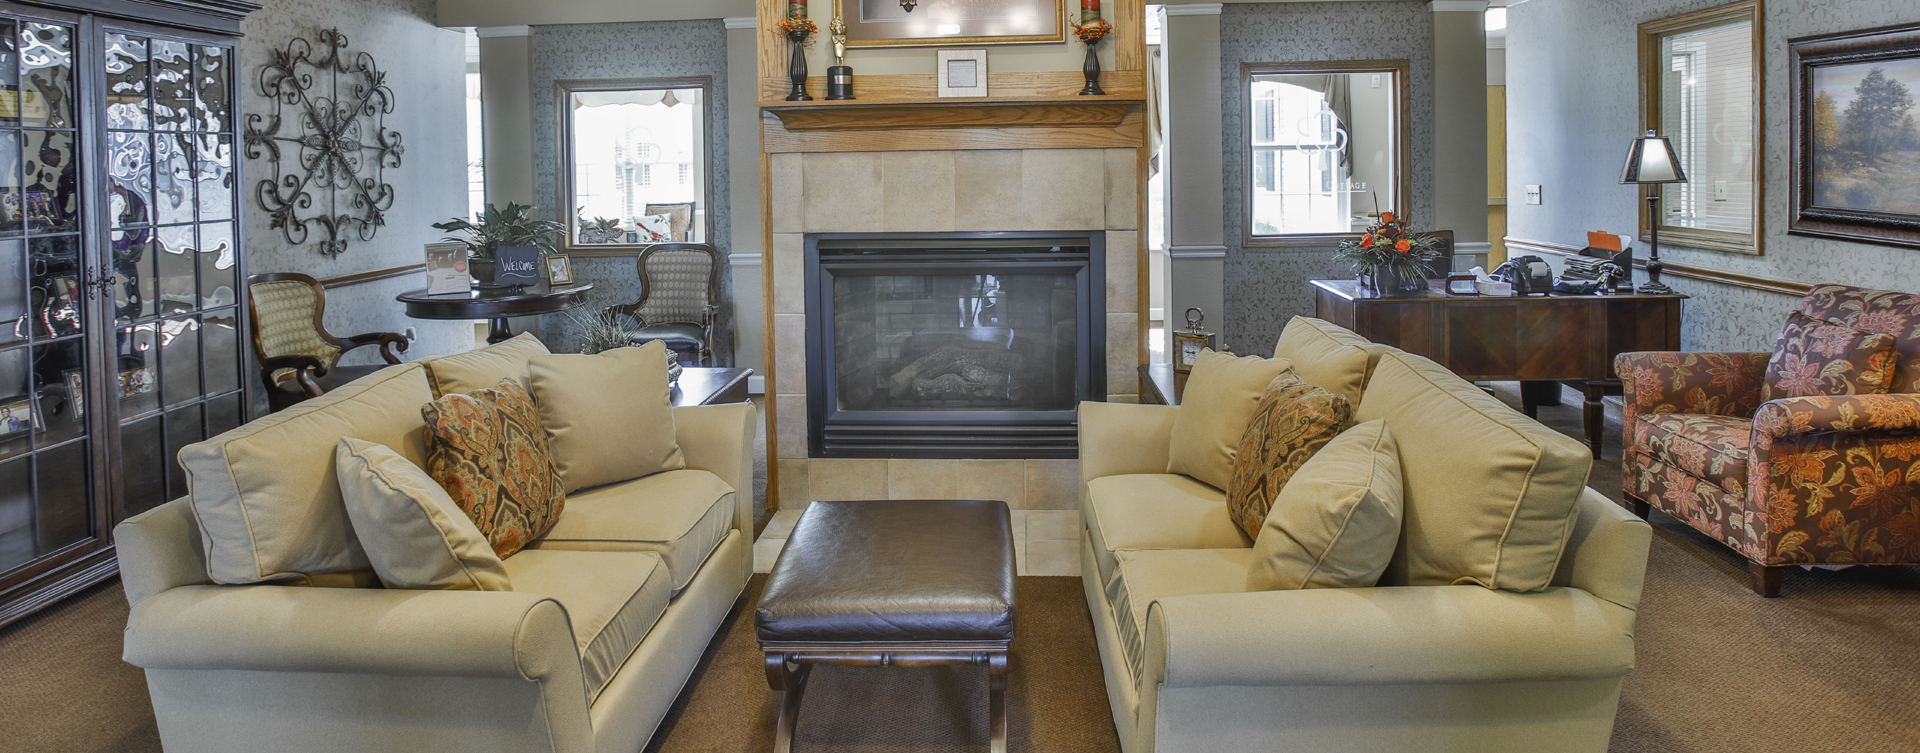 Chairs and sofas sit higher and are easier to get in and out of in the Mary B’s living room at Bickford of Peoria